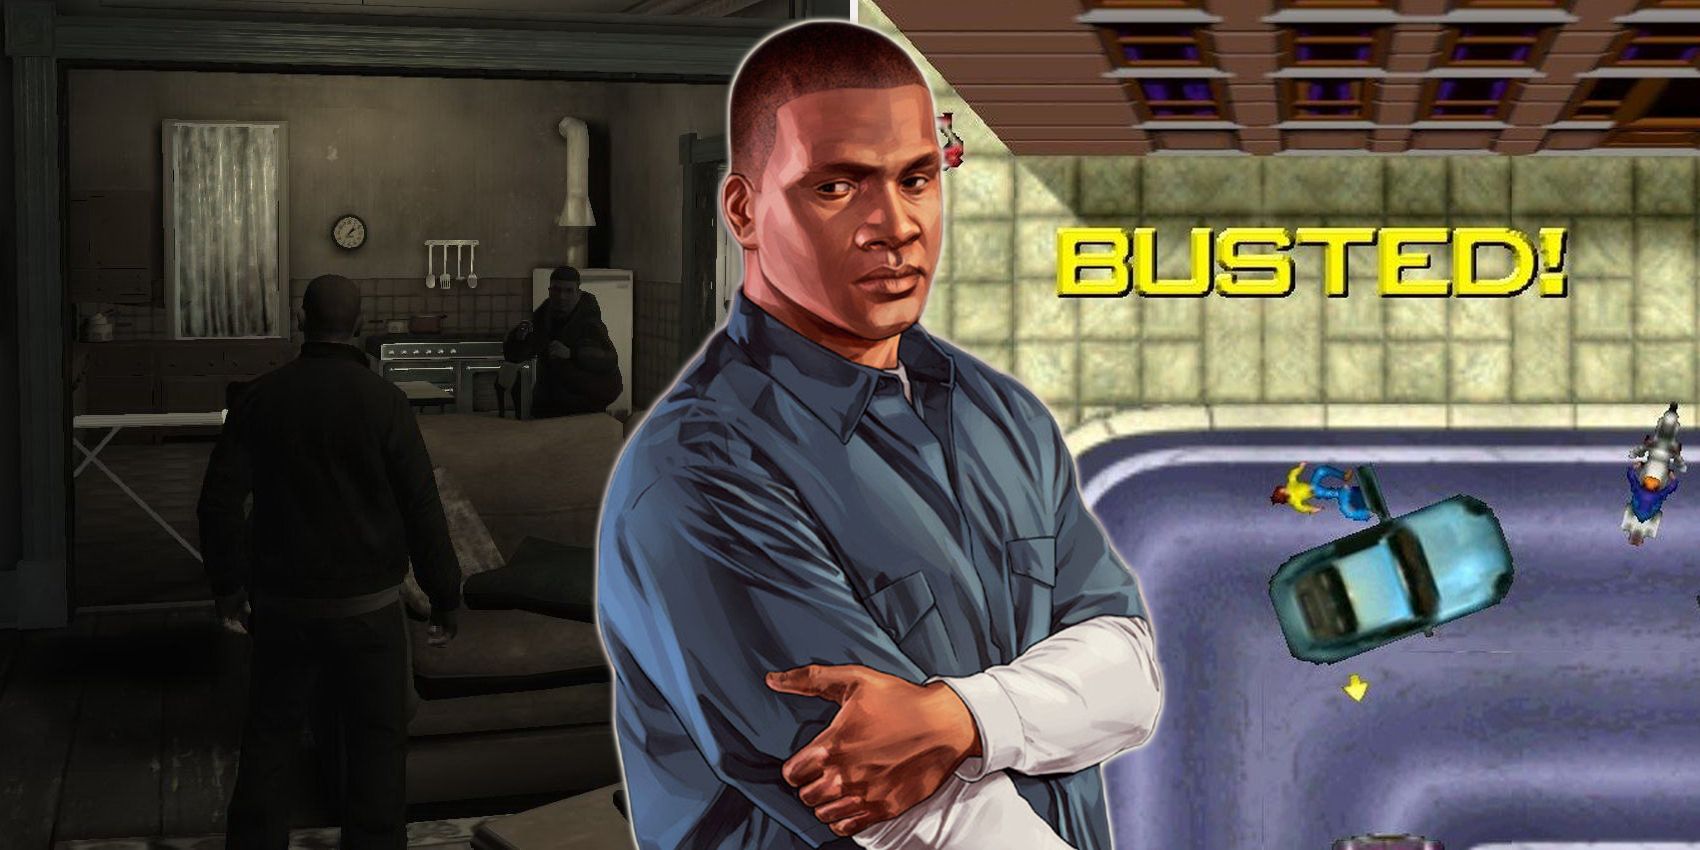 The Most Inappropriate Moments In Grand Theft Auto